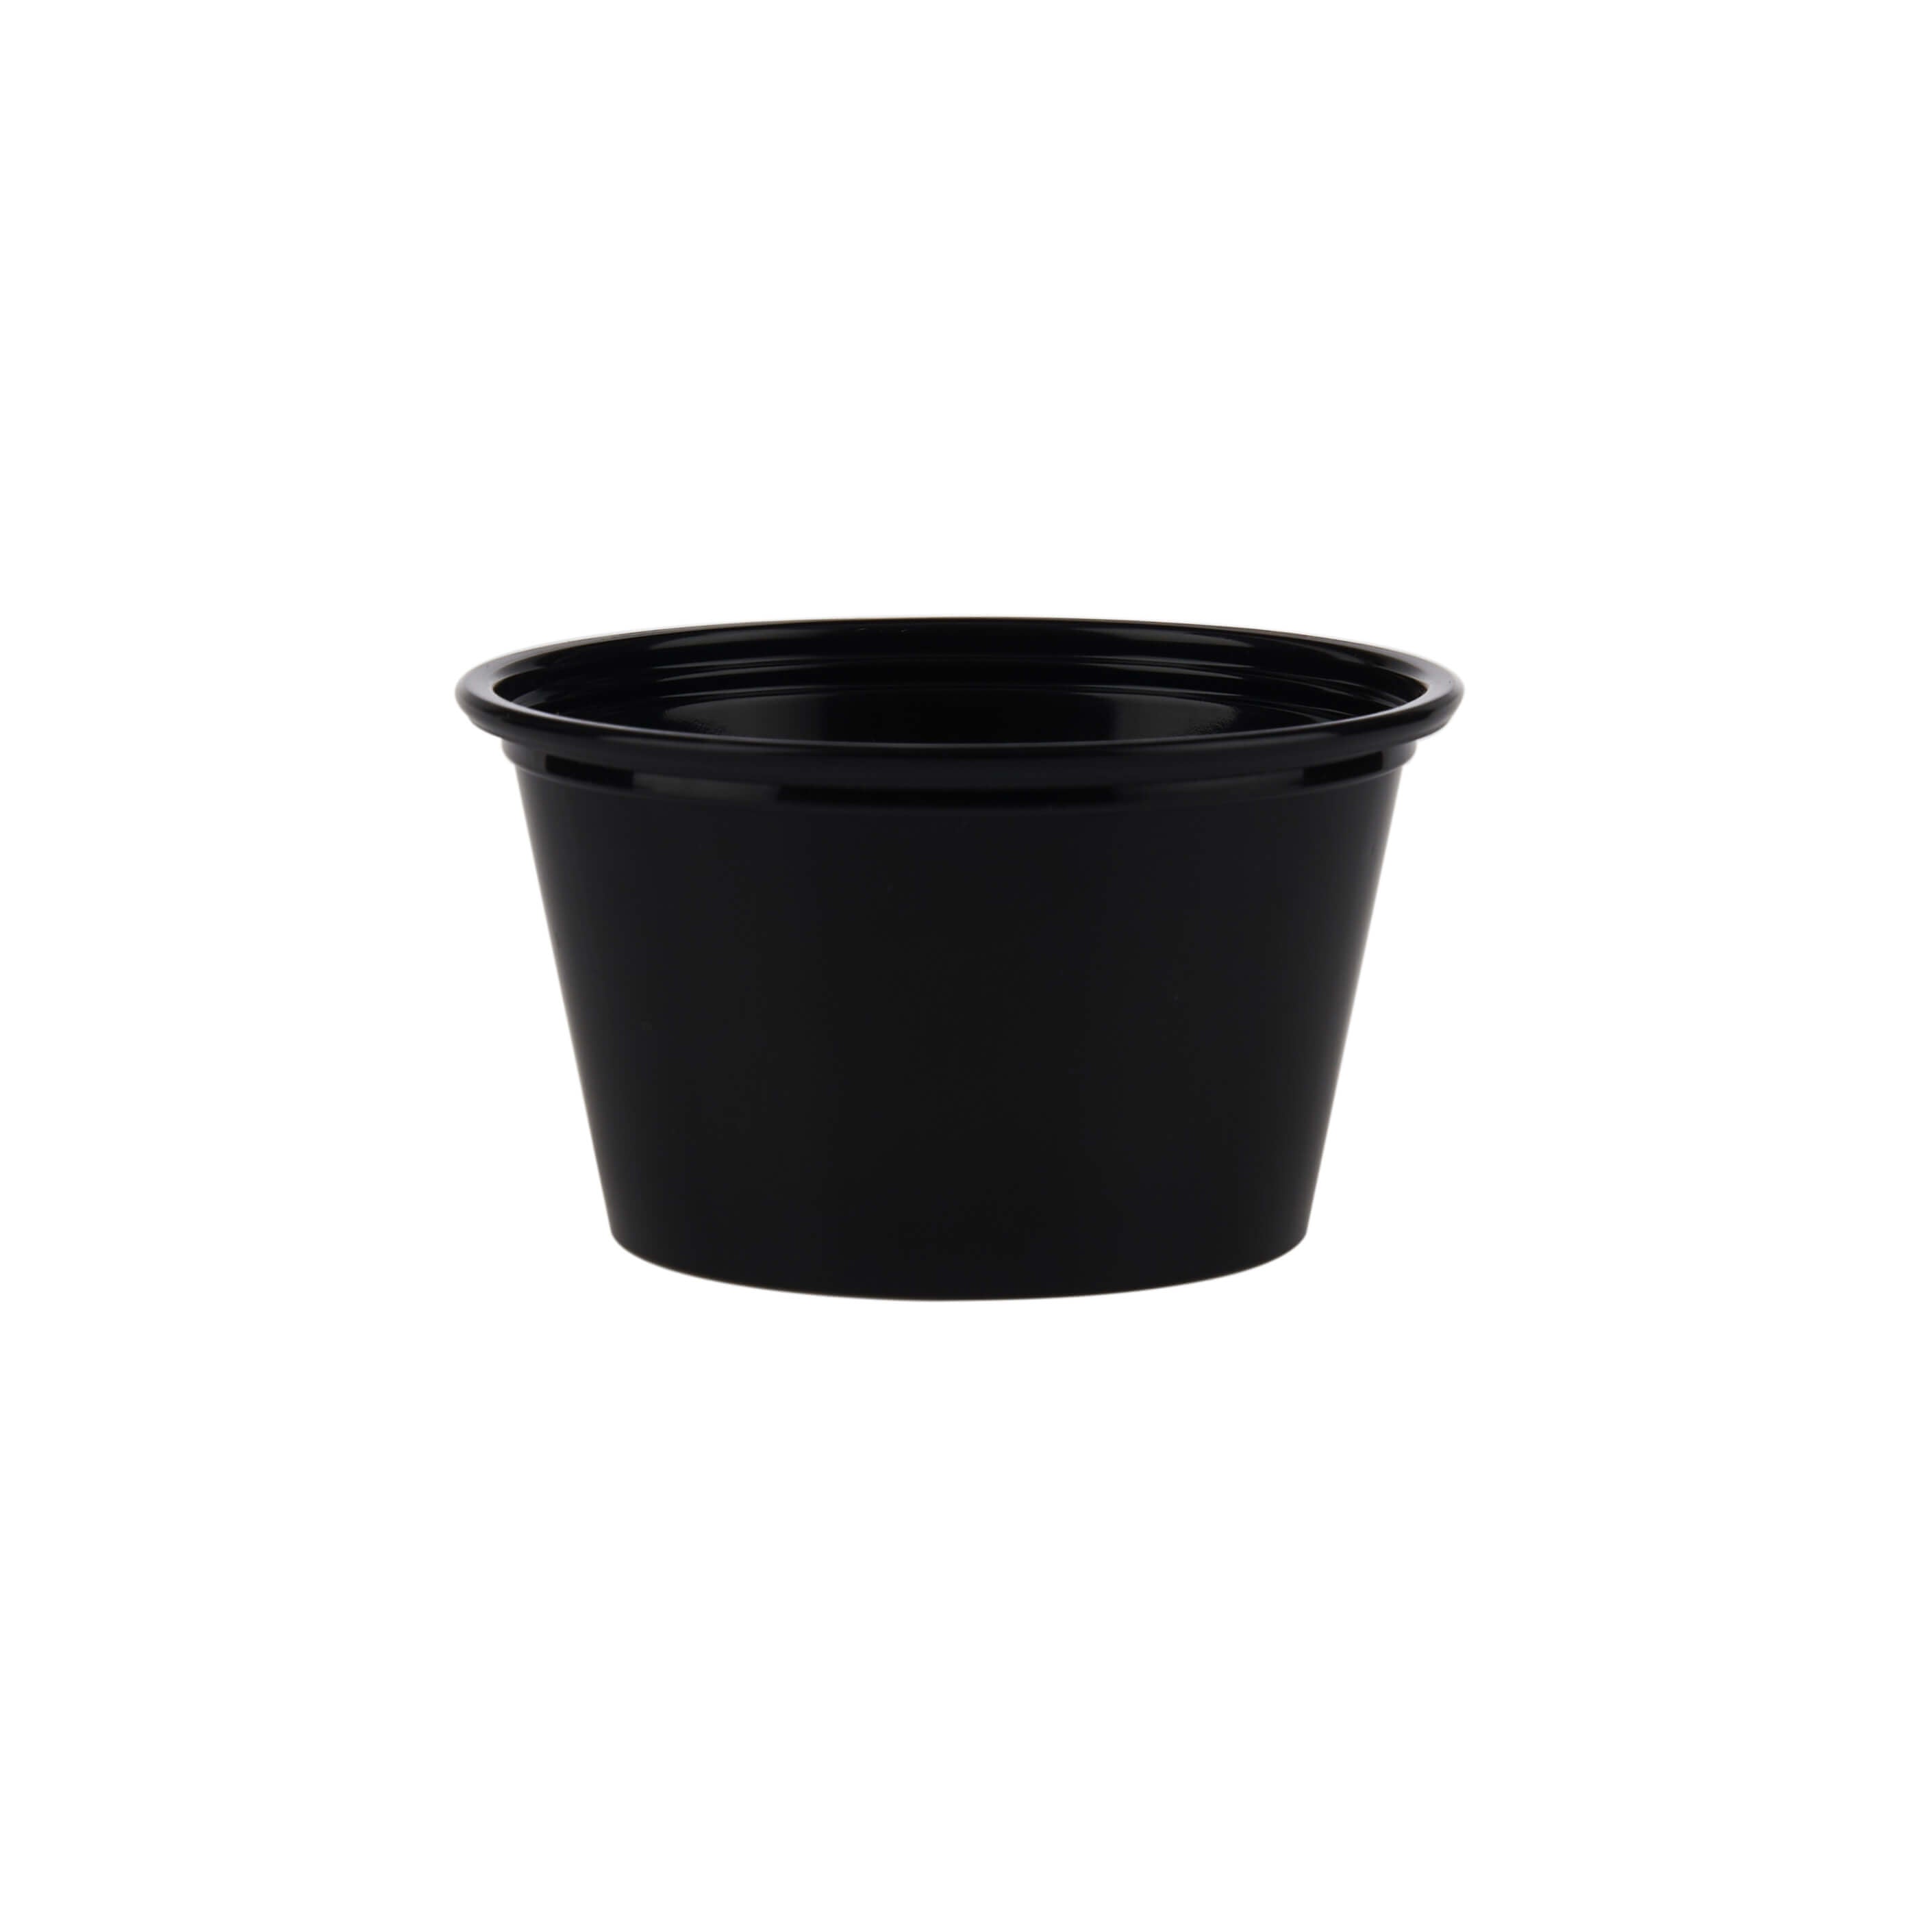 100ml or 100cc Black PET Portion Cup for sauces and condiments- Hotpack Global